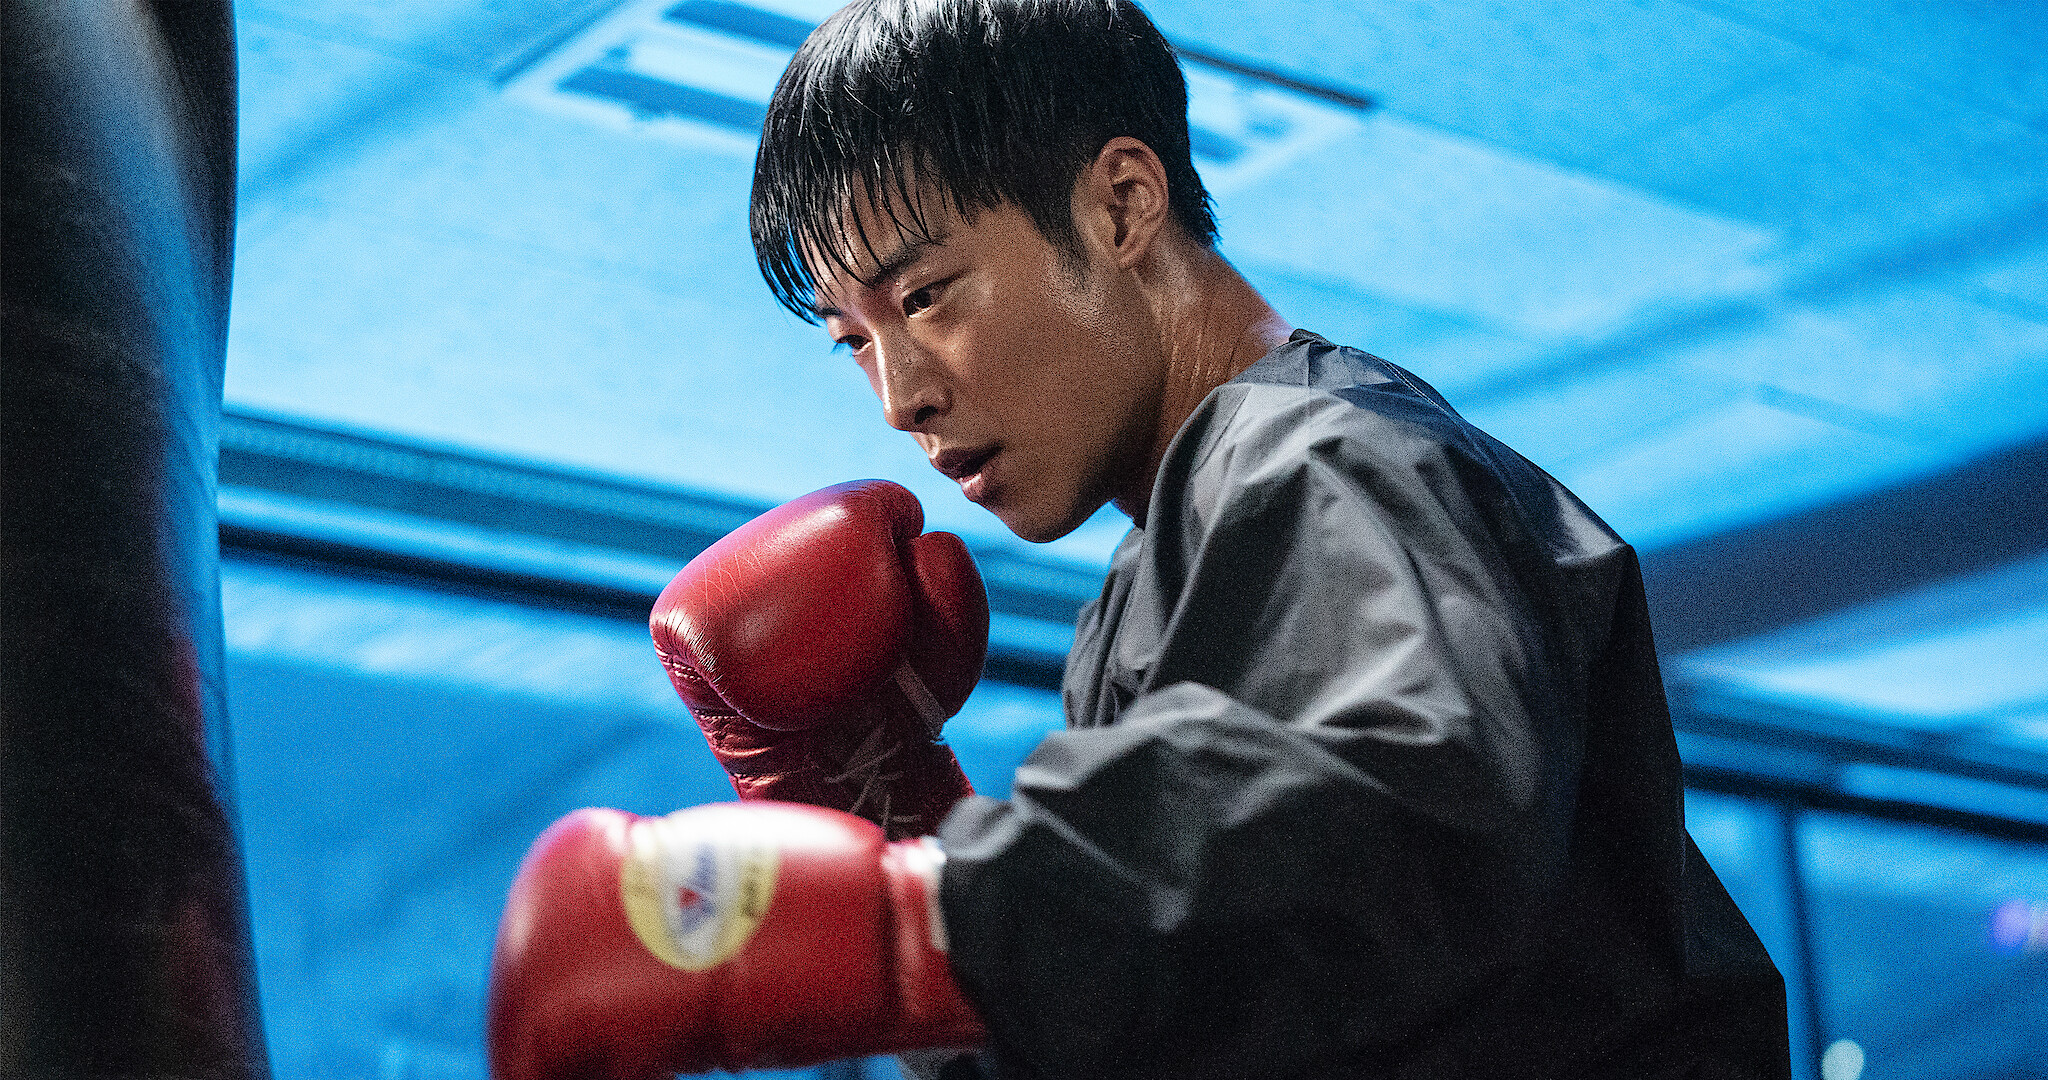 Bloodhounds, What You Need to Know About the Korean Action Thriller K-Drama Series pic